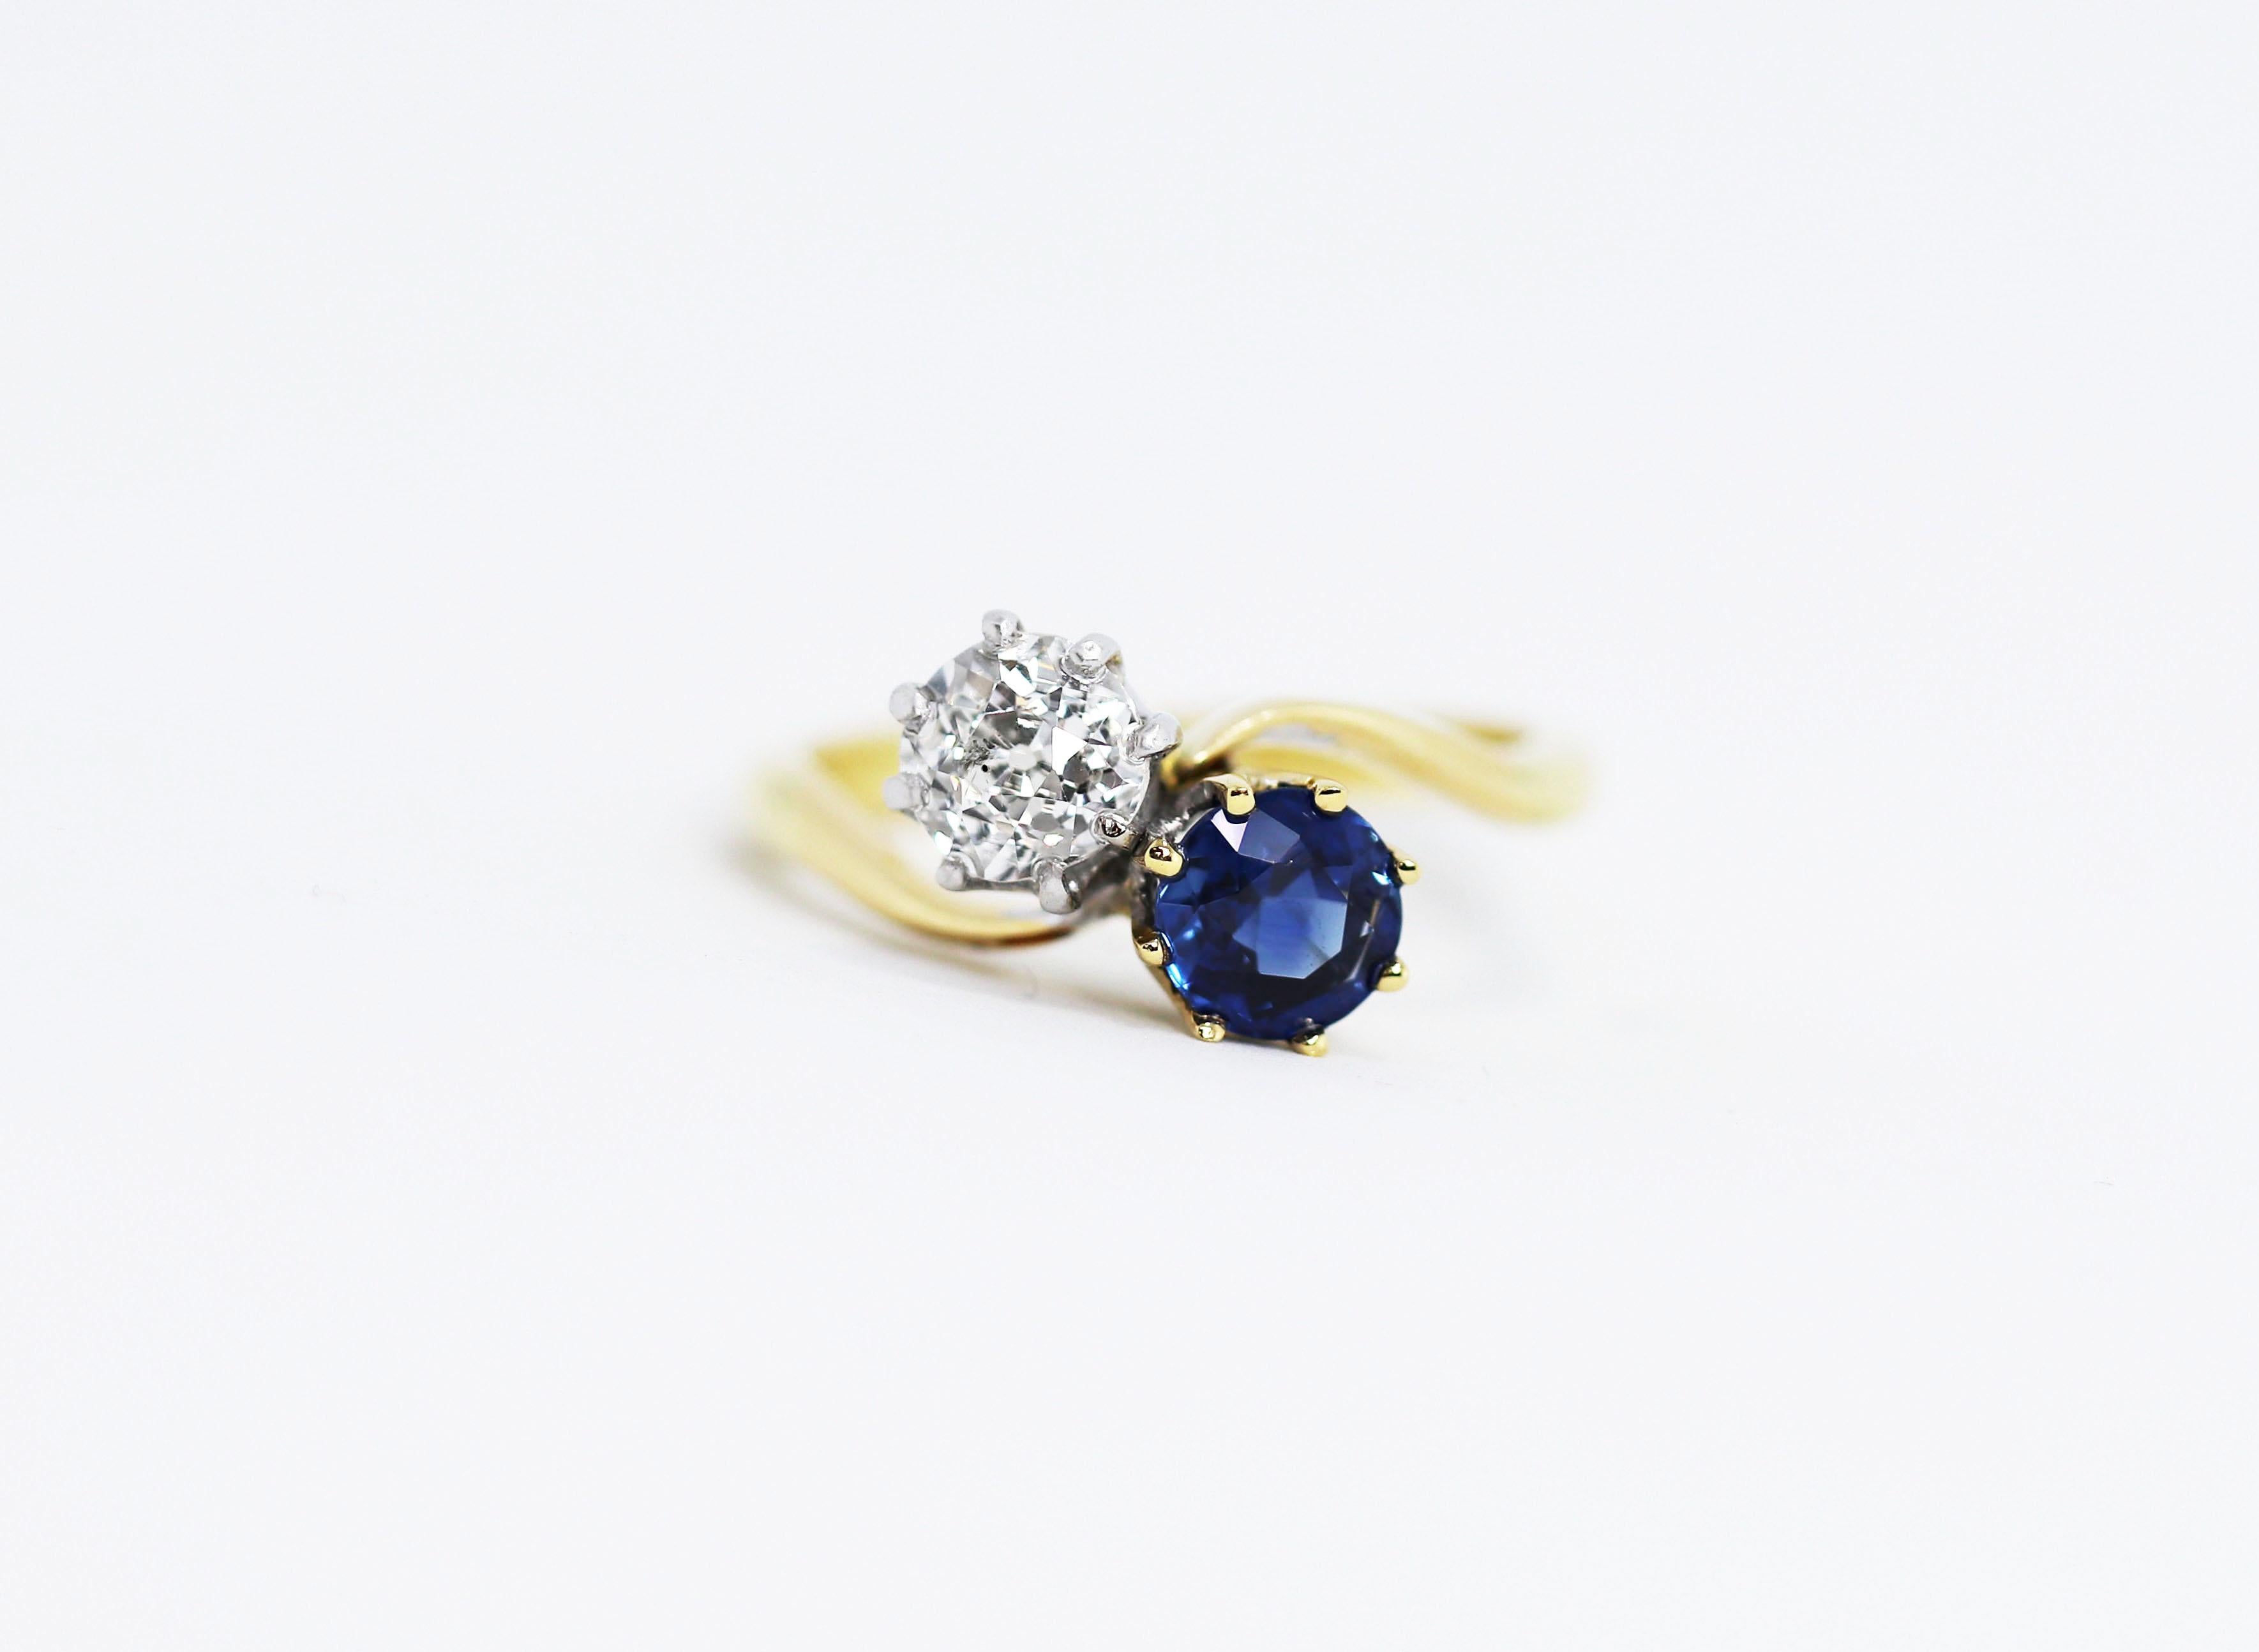 Beautiful Edwardian two-stone twist ring set with a natural blue sapphire weighing 0.87 carat and an old mine cut diamond weighing 0.75 carat. The diamond is set in a platinum 8 claw crown collet with the blue sapphire set in a 18 carat yellow gold